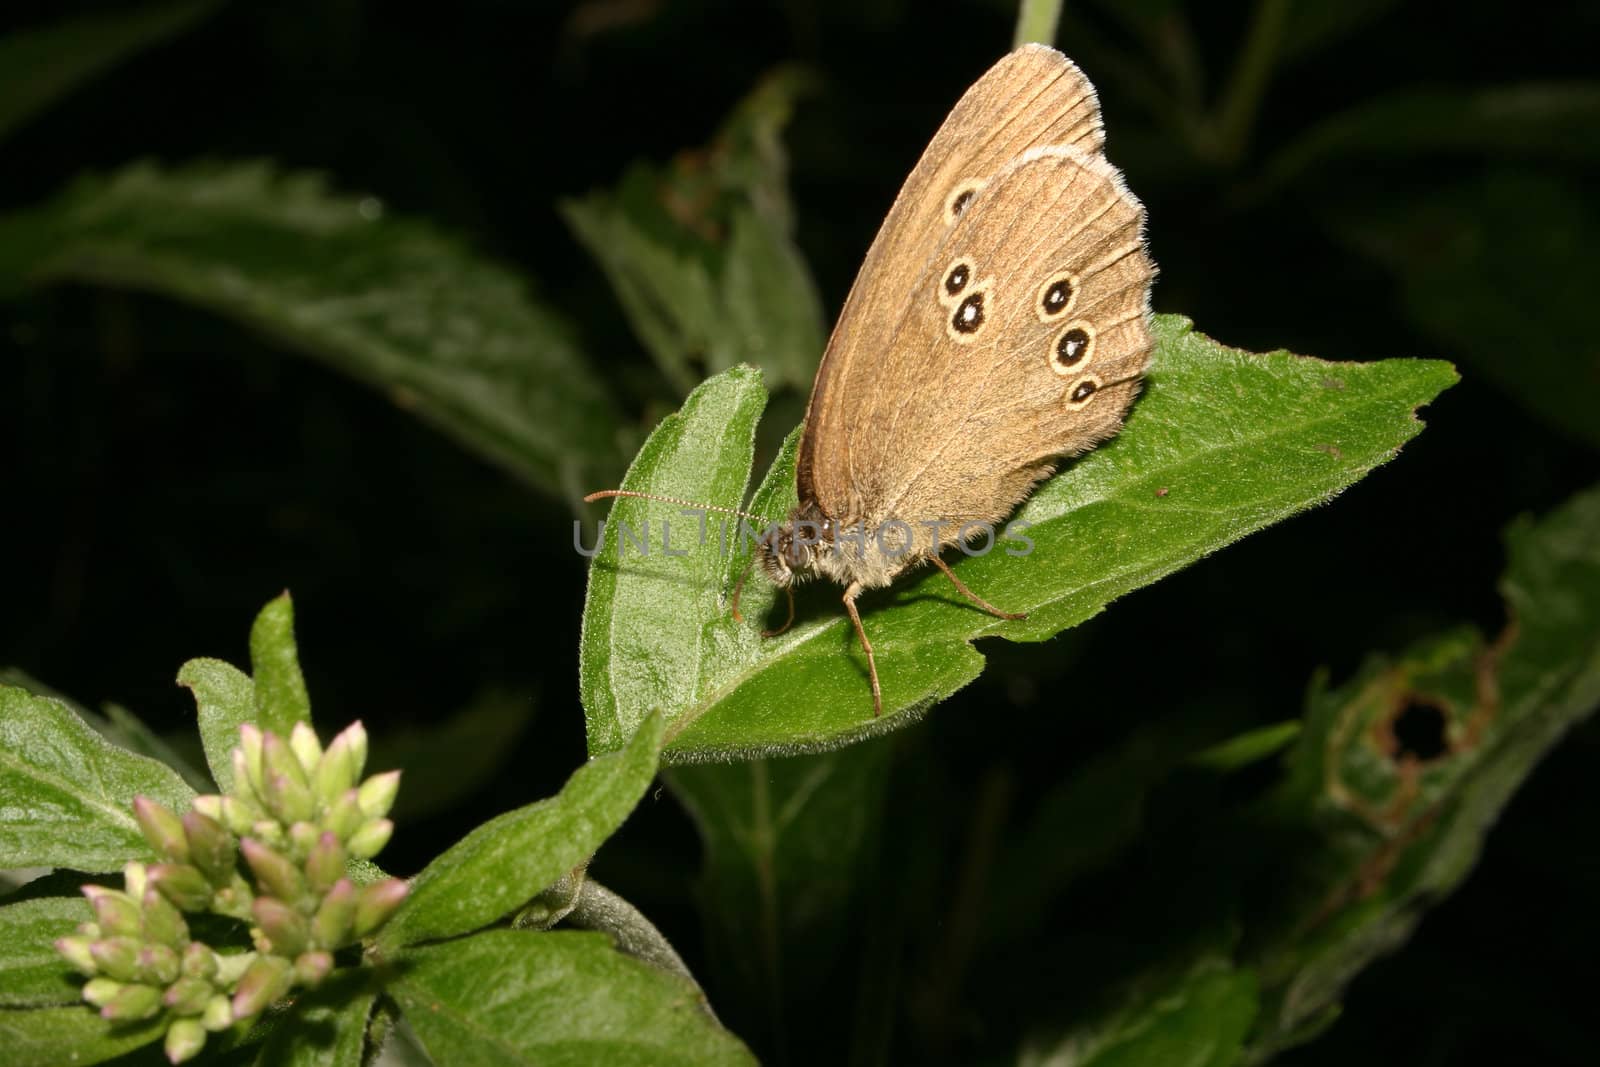 The Ringlet (Aphantopus hyperantus) by tdietrich